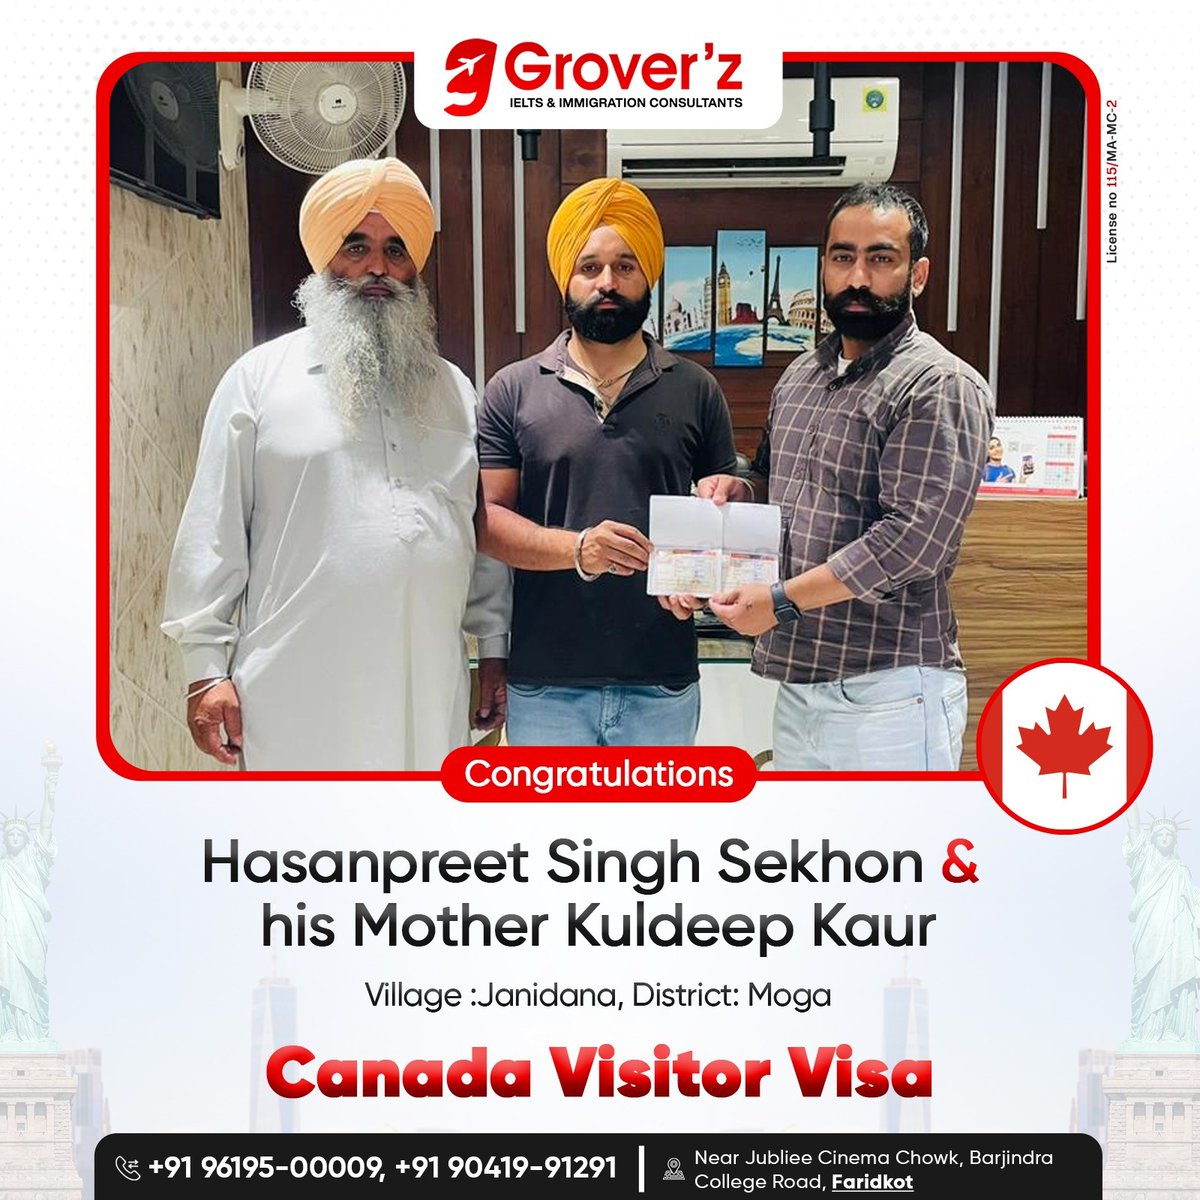 Hasanpreet Singh Sekhon and his mother Kuldeep Kaur are all set to visit Canada with their approved visitor visas, guided by us! ☎ 96195-00009, 90419-91291 Visit us: groverz.in #GroverzIeltsImmigration #Canada #VisitorVisa #VisitCanada #Visaapproved #Immigration